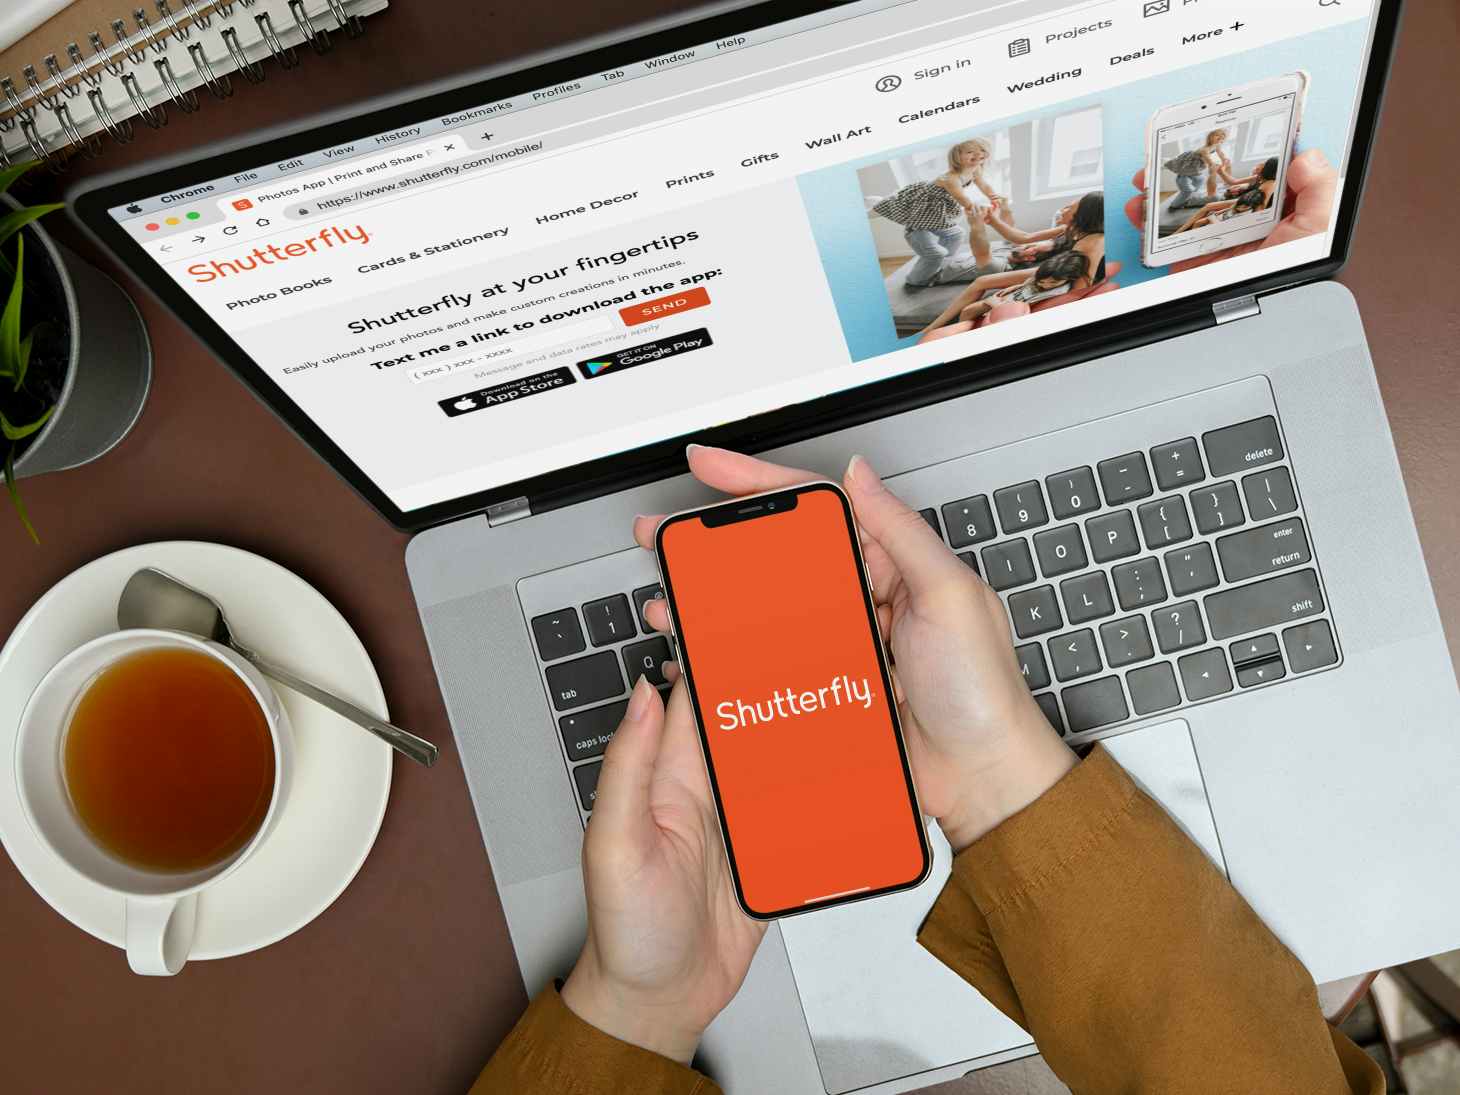 person with laptop and iphone showing shutterfly site and app